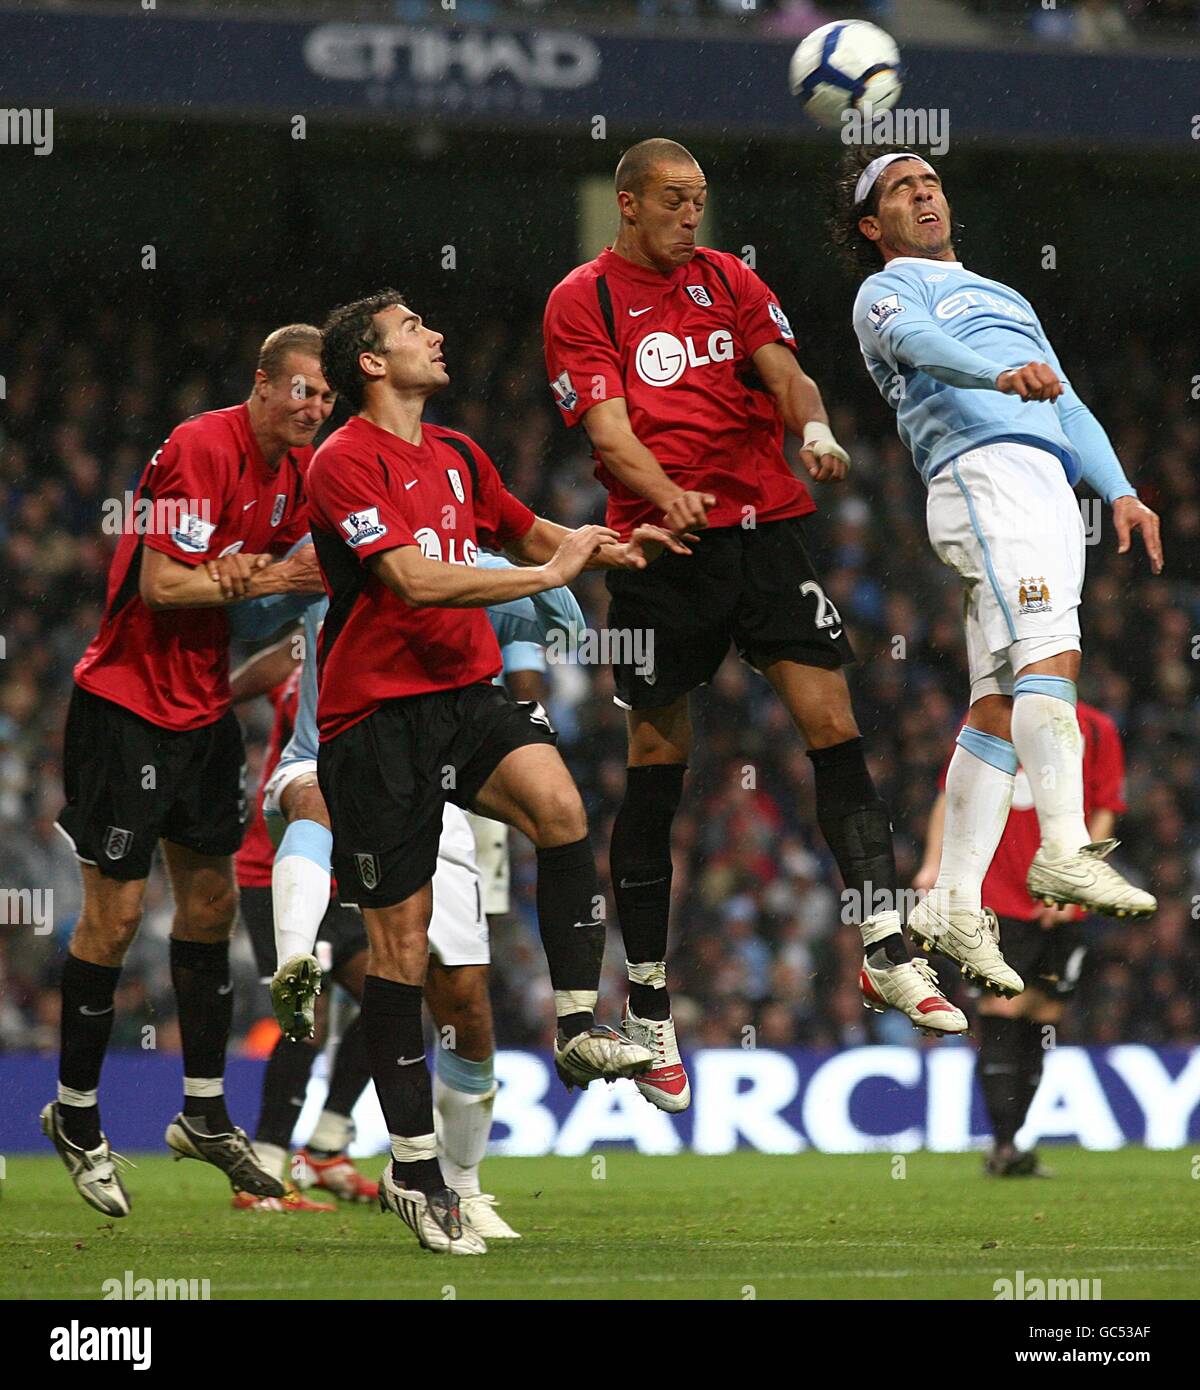 Manchester City's Carlos Tevez (right) directs a header on goal, under pressure from Fulham's Stephen Kelly (left centre) and Bobby Zamora Stock Photo